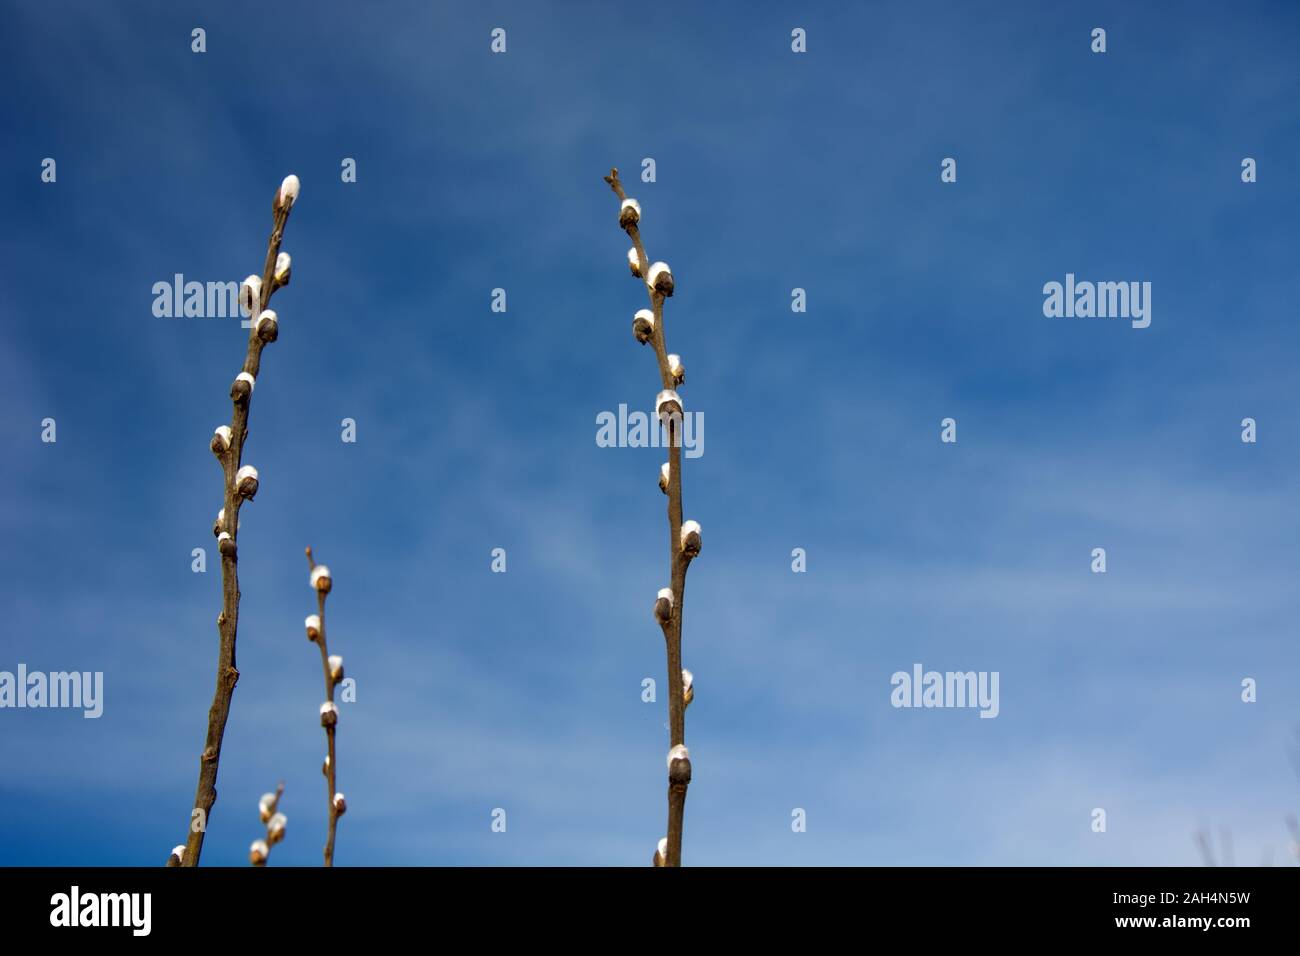 Flowering catkins against the sky Stock Photo